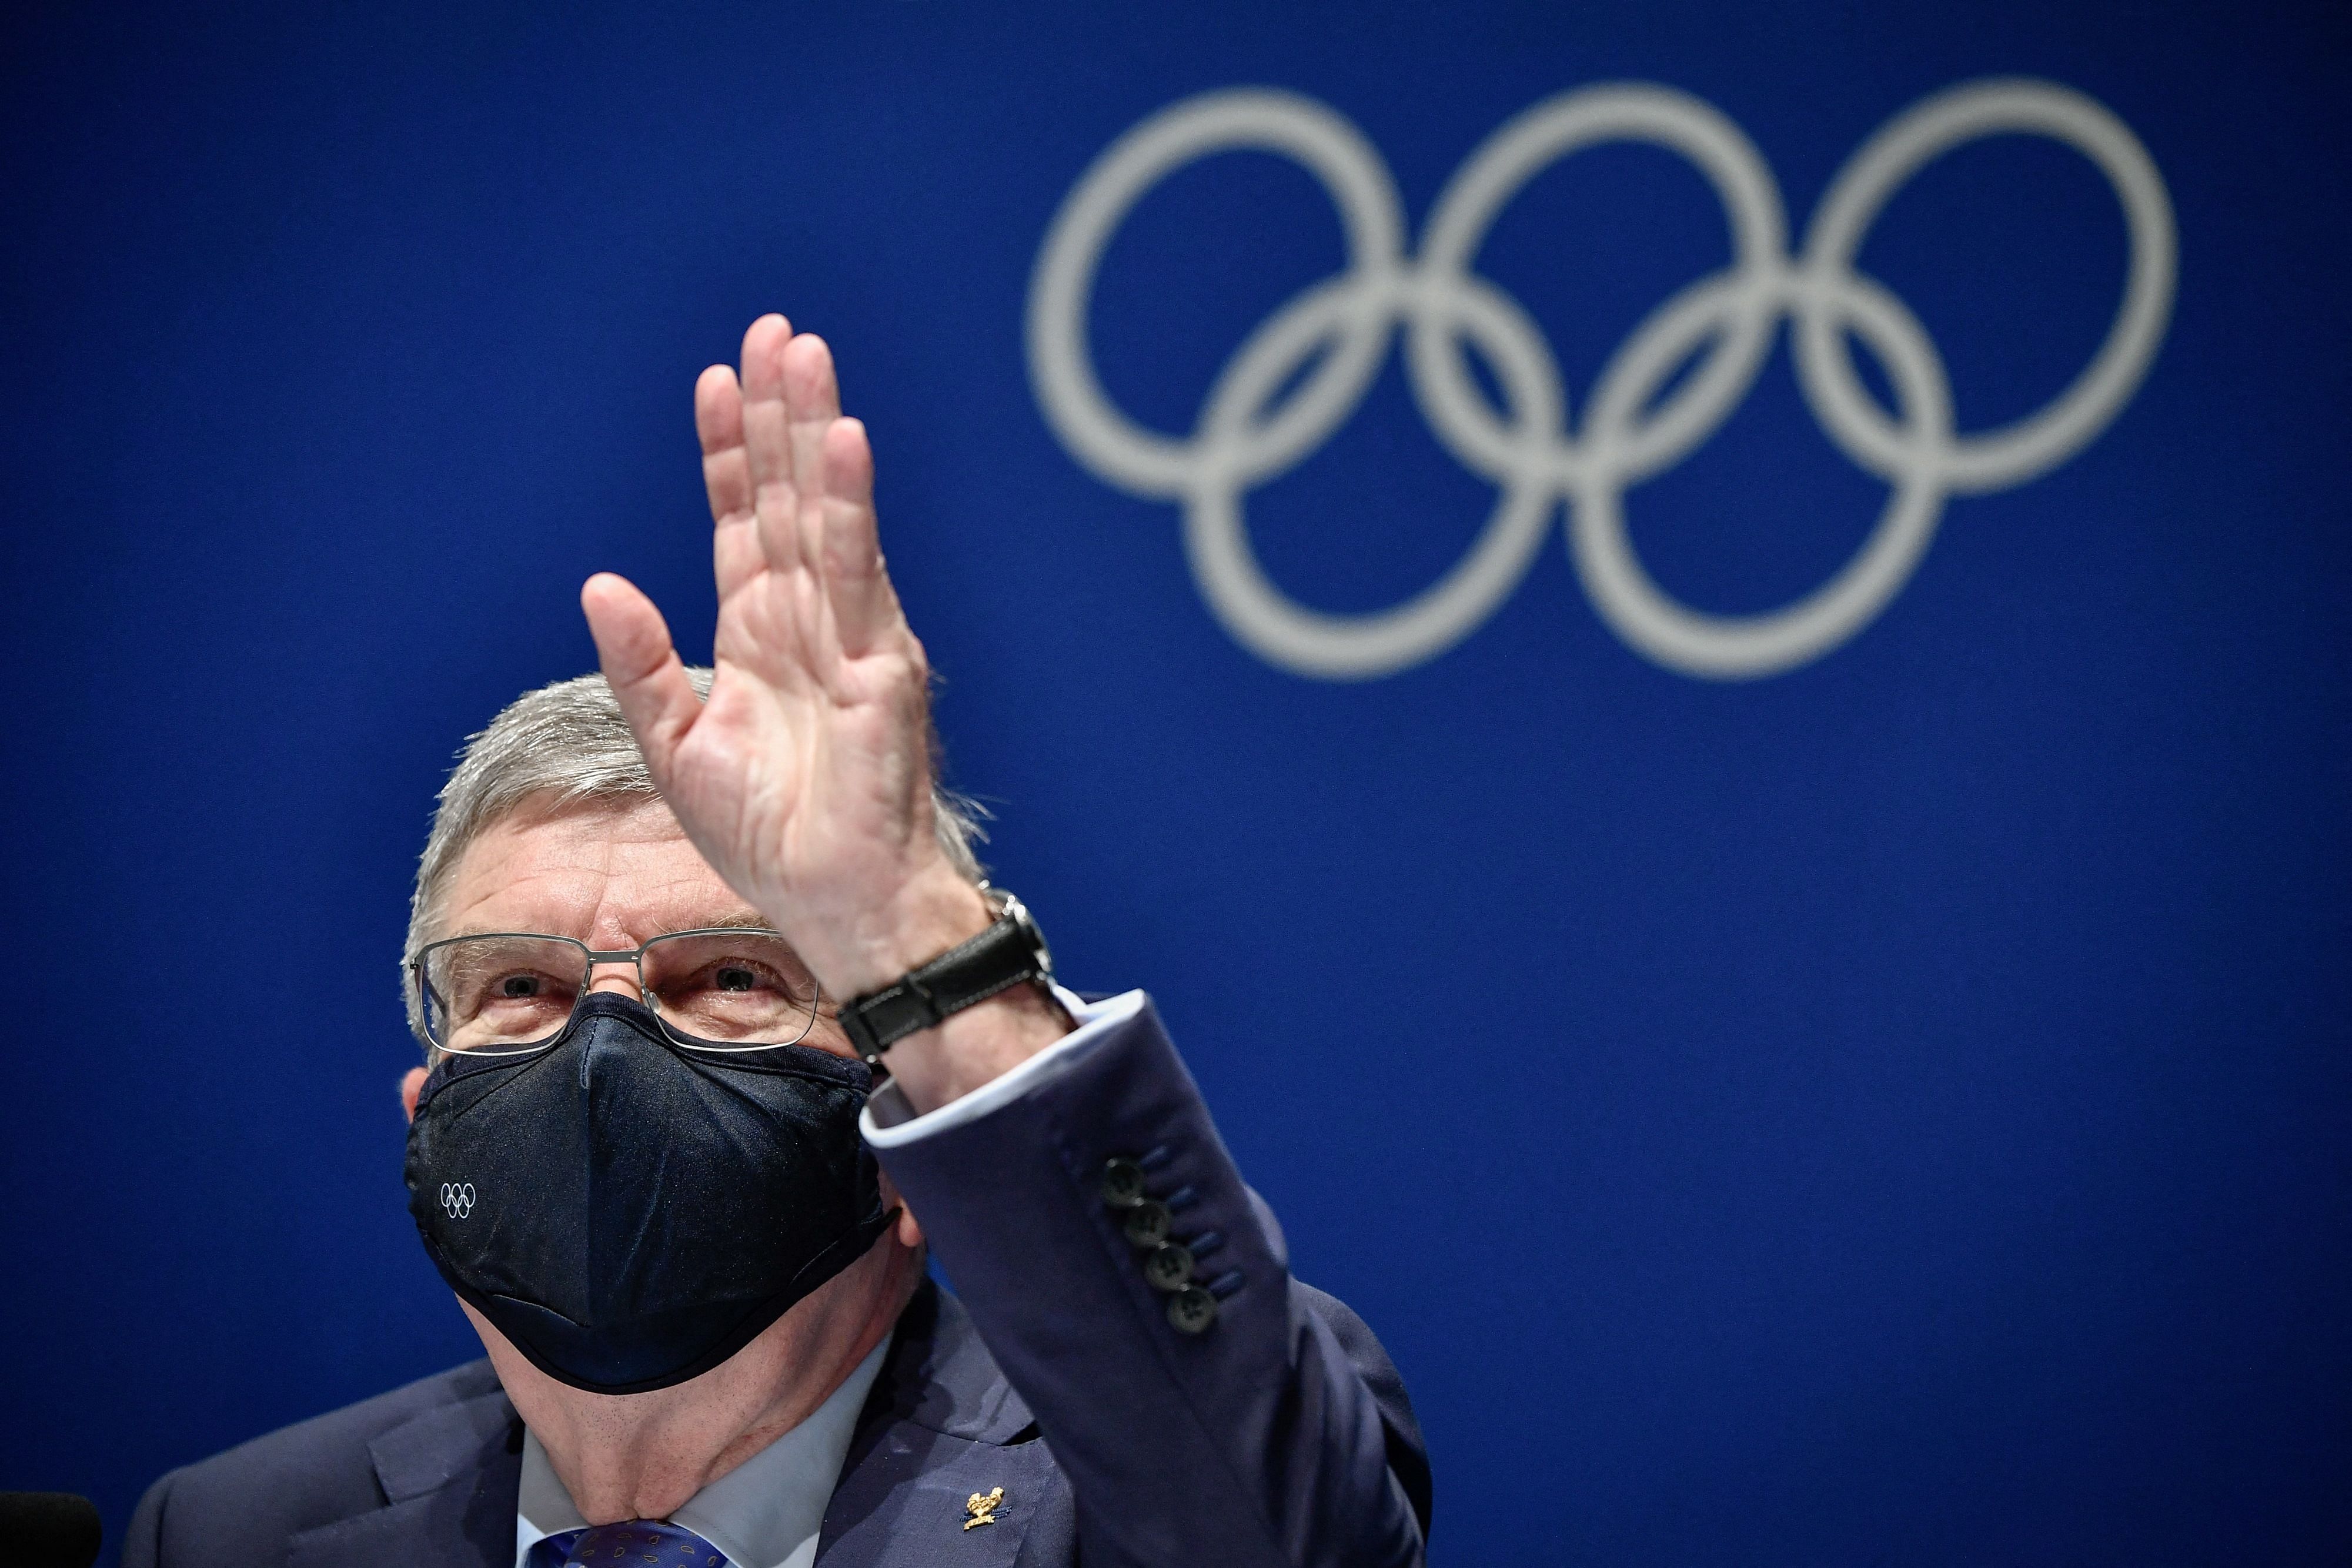 International Olympic Committee (IOC) president Thomas Bach gestures. Credit: AFP